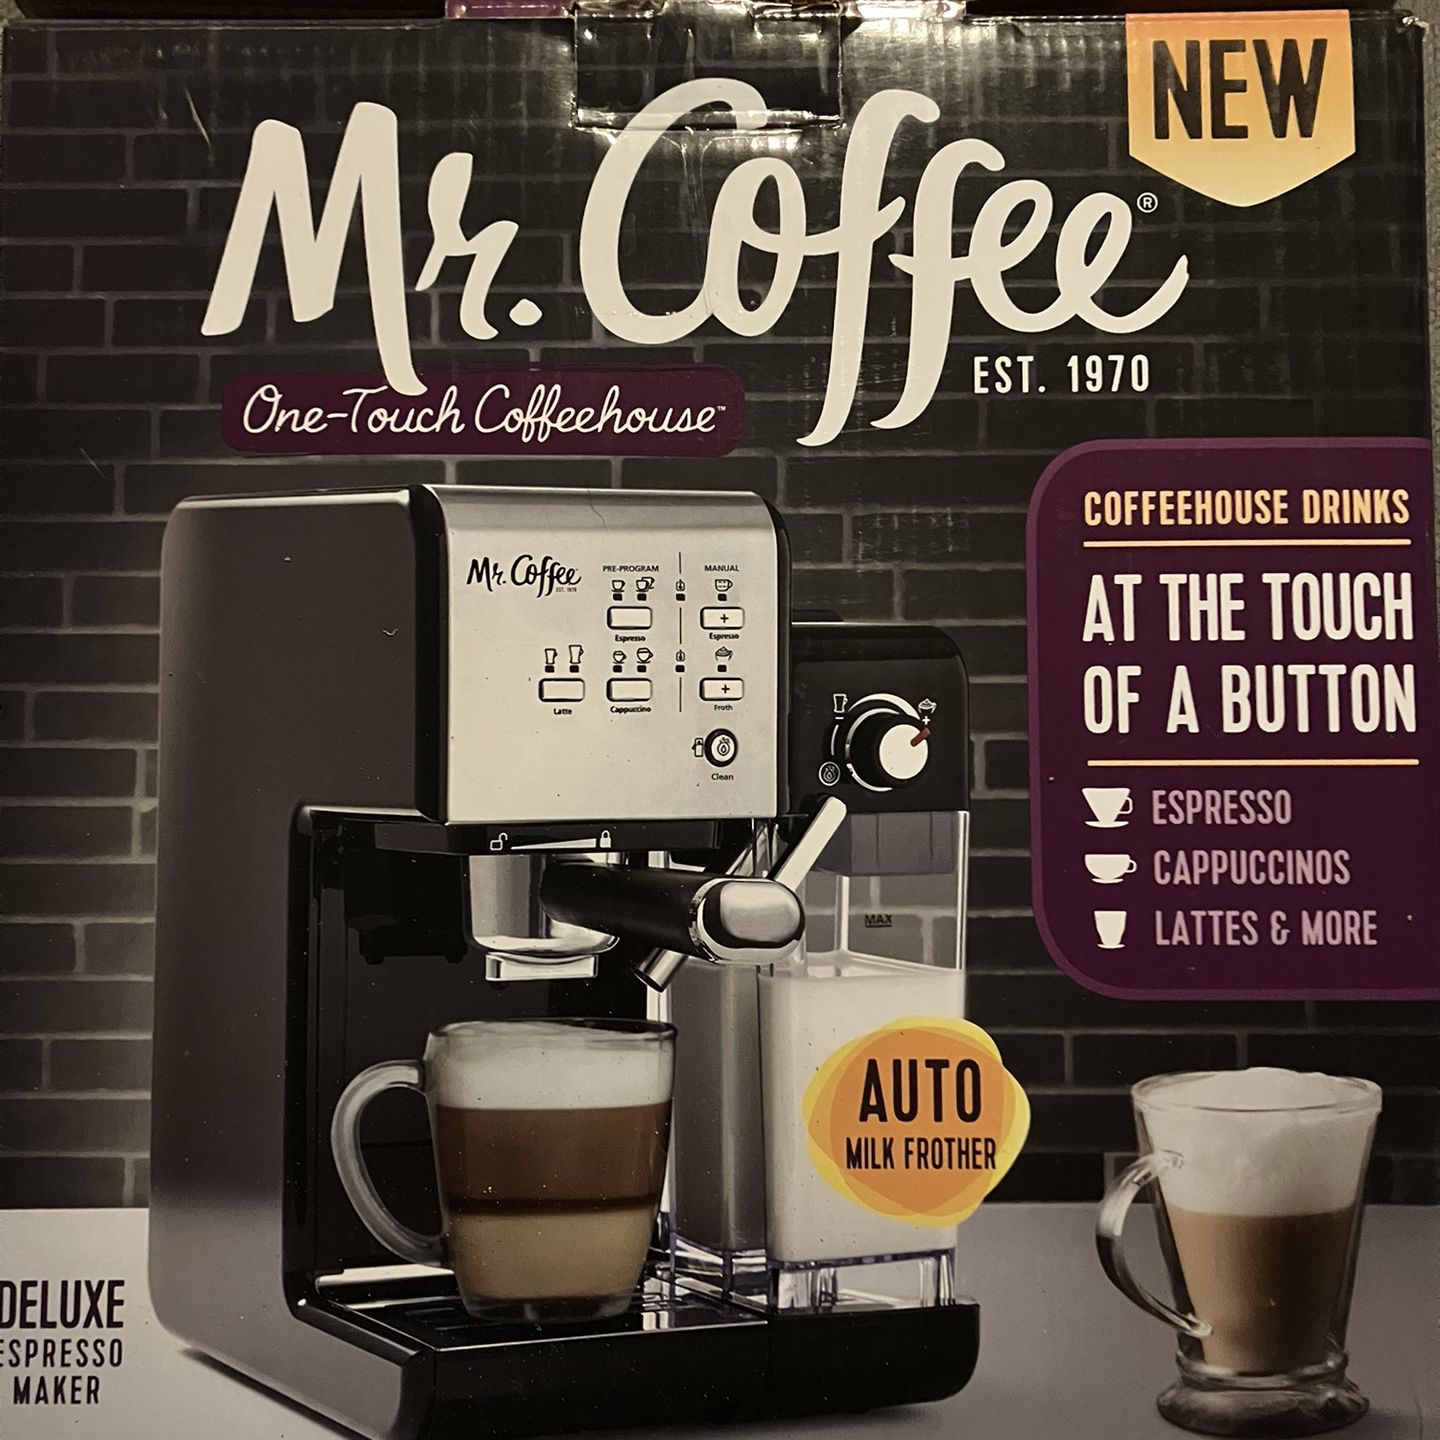 Mr. Coffee New One-Touch CoffeeHouse Espresso, Cappuccino, and